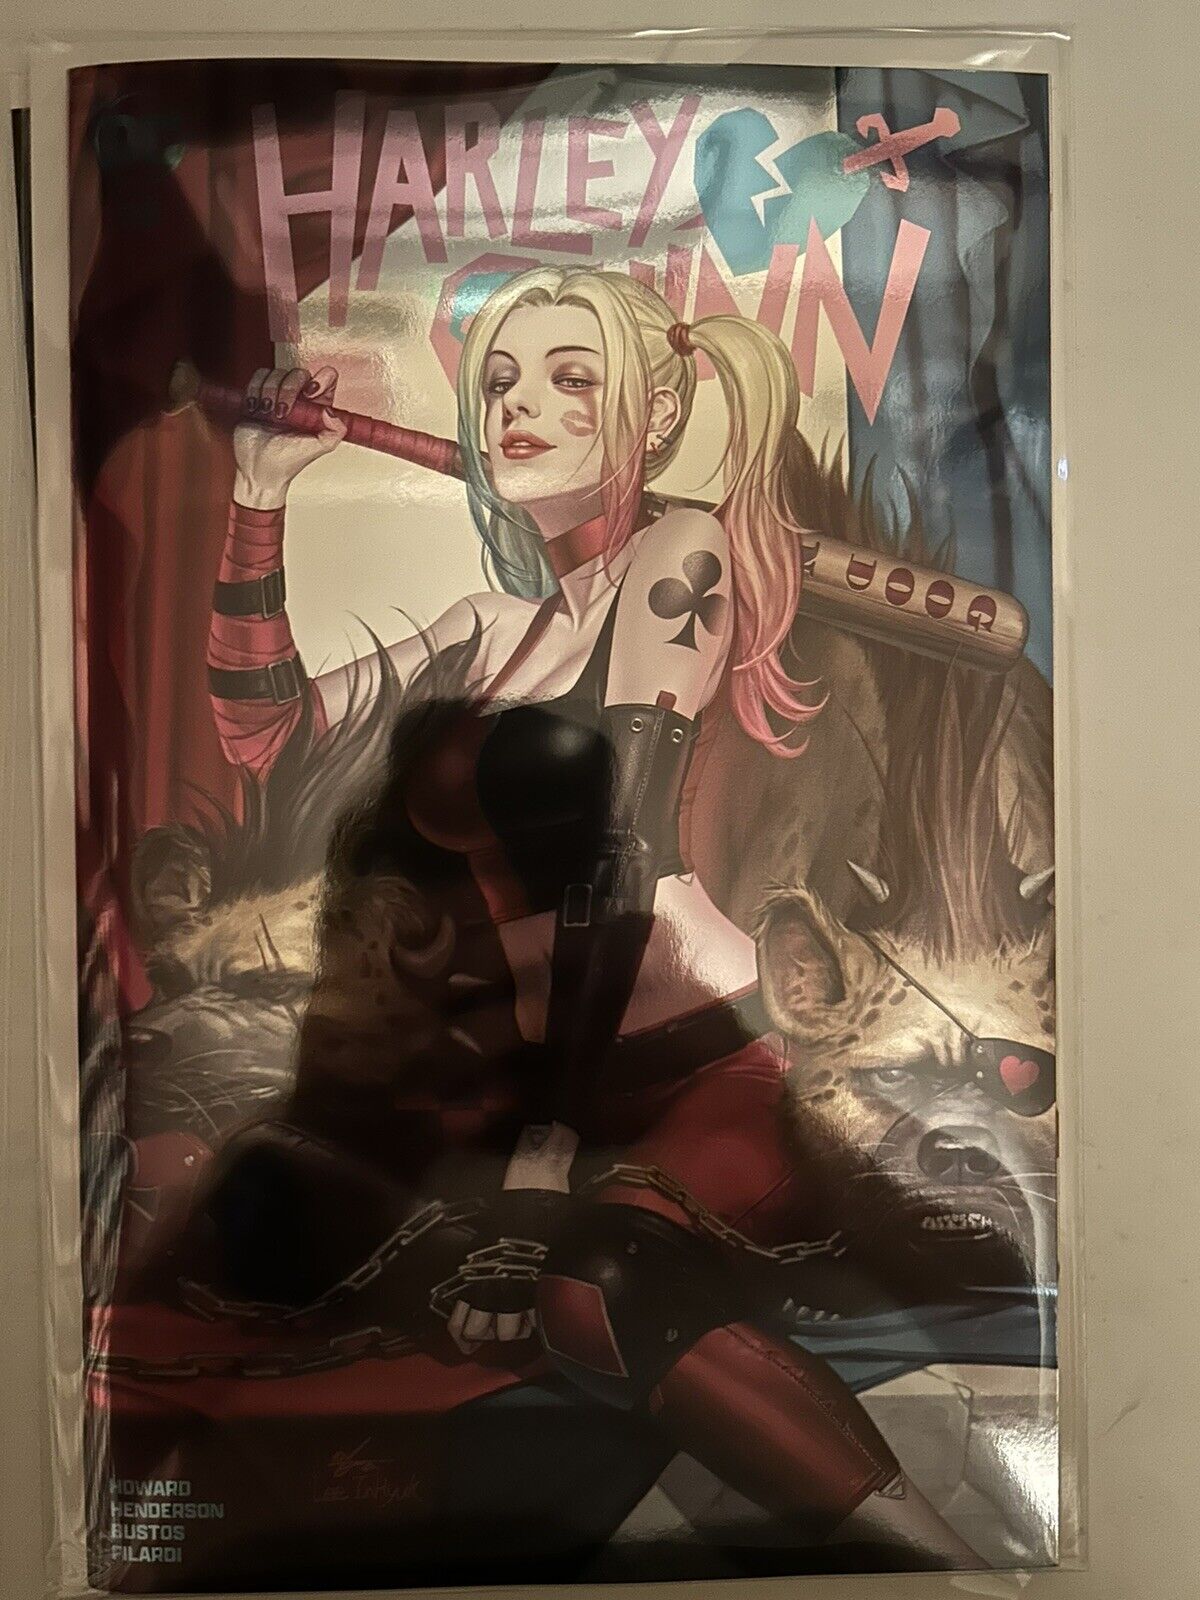 HARLEY QUINN #39 INHYUK LEE FOIL EXCLUSIVE LIMITED TO 800 WITH COA